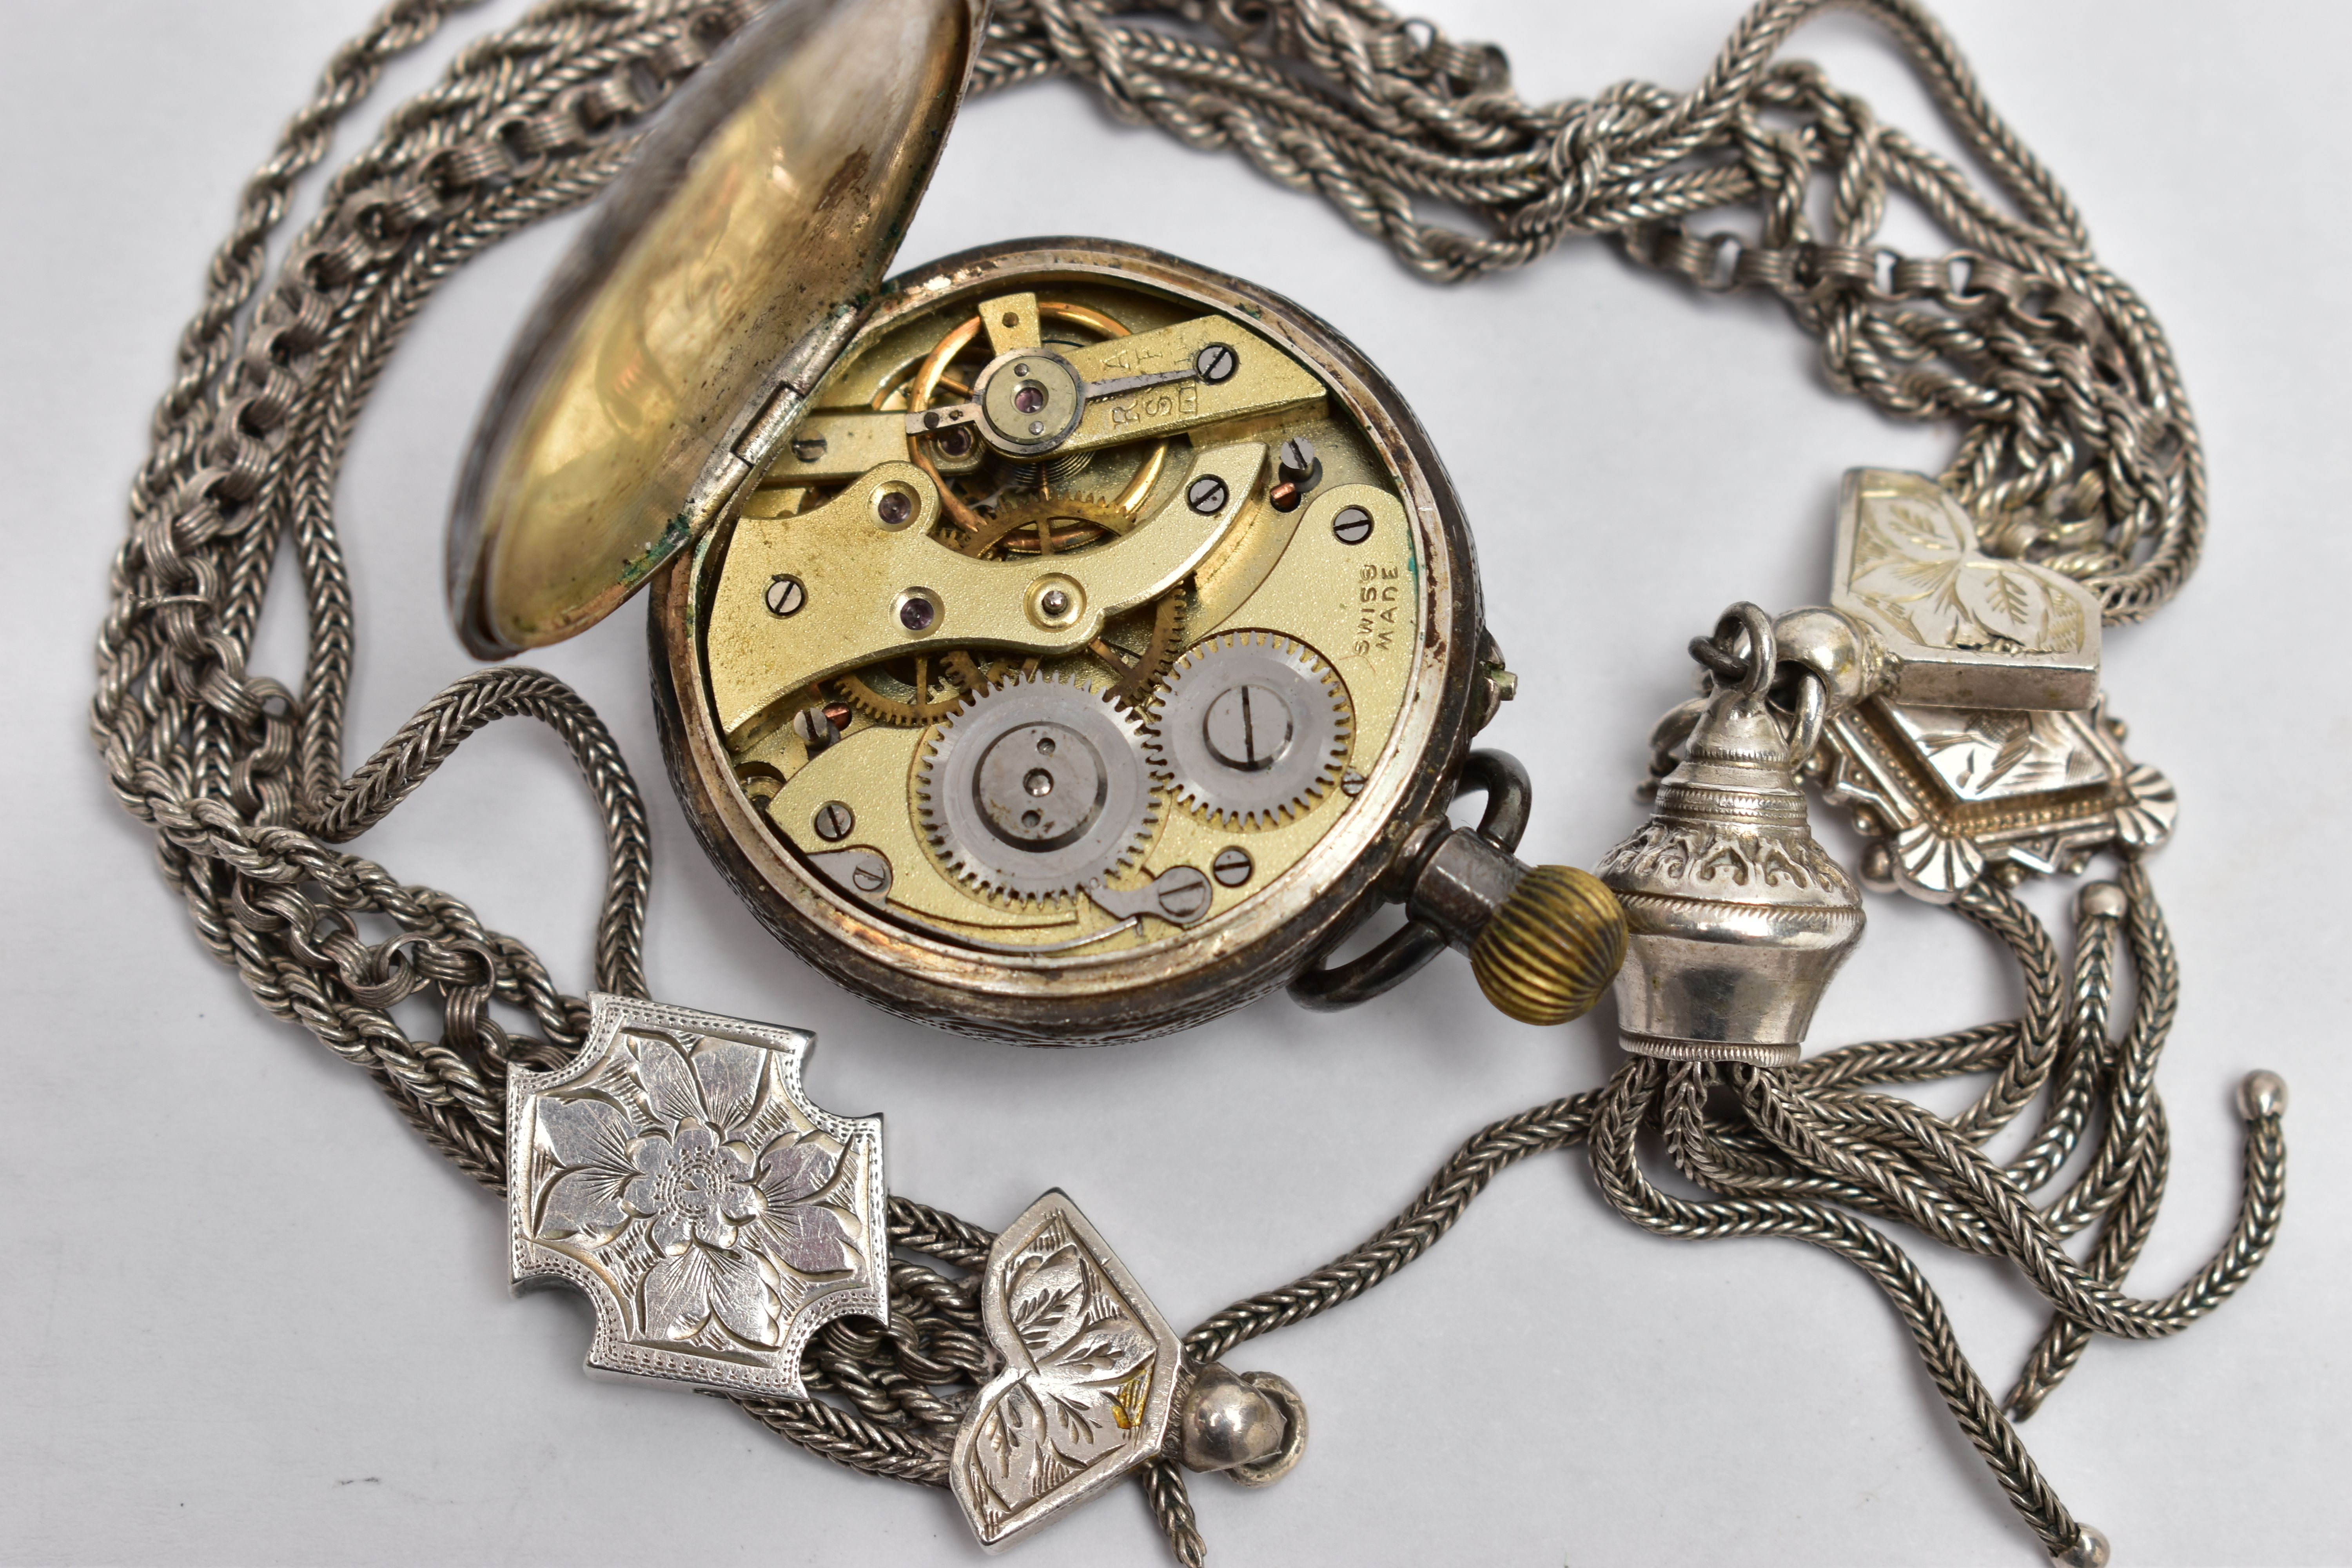 A SMALL OPEN FACE POCKET WATCH AND ALBERTINA, the manual wind pocket watch with round white dial, - Image 4 of 4